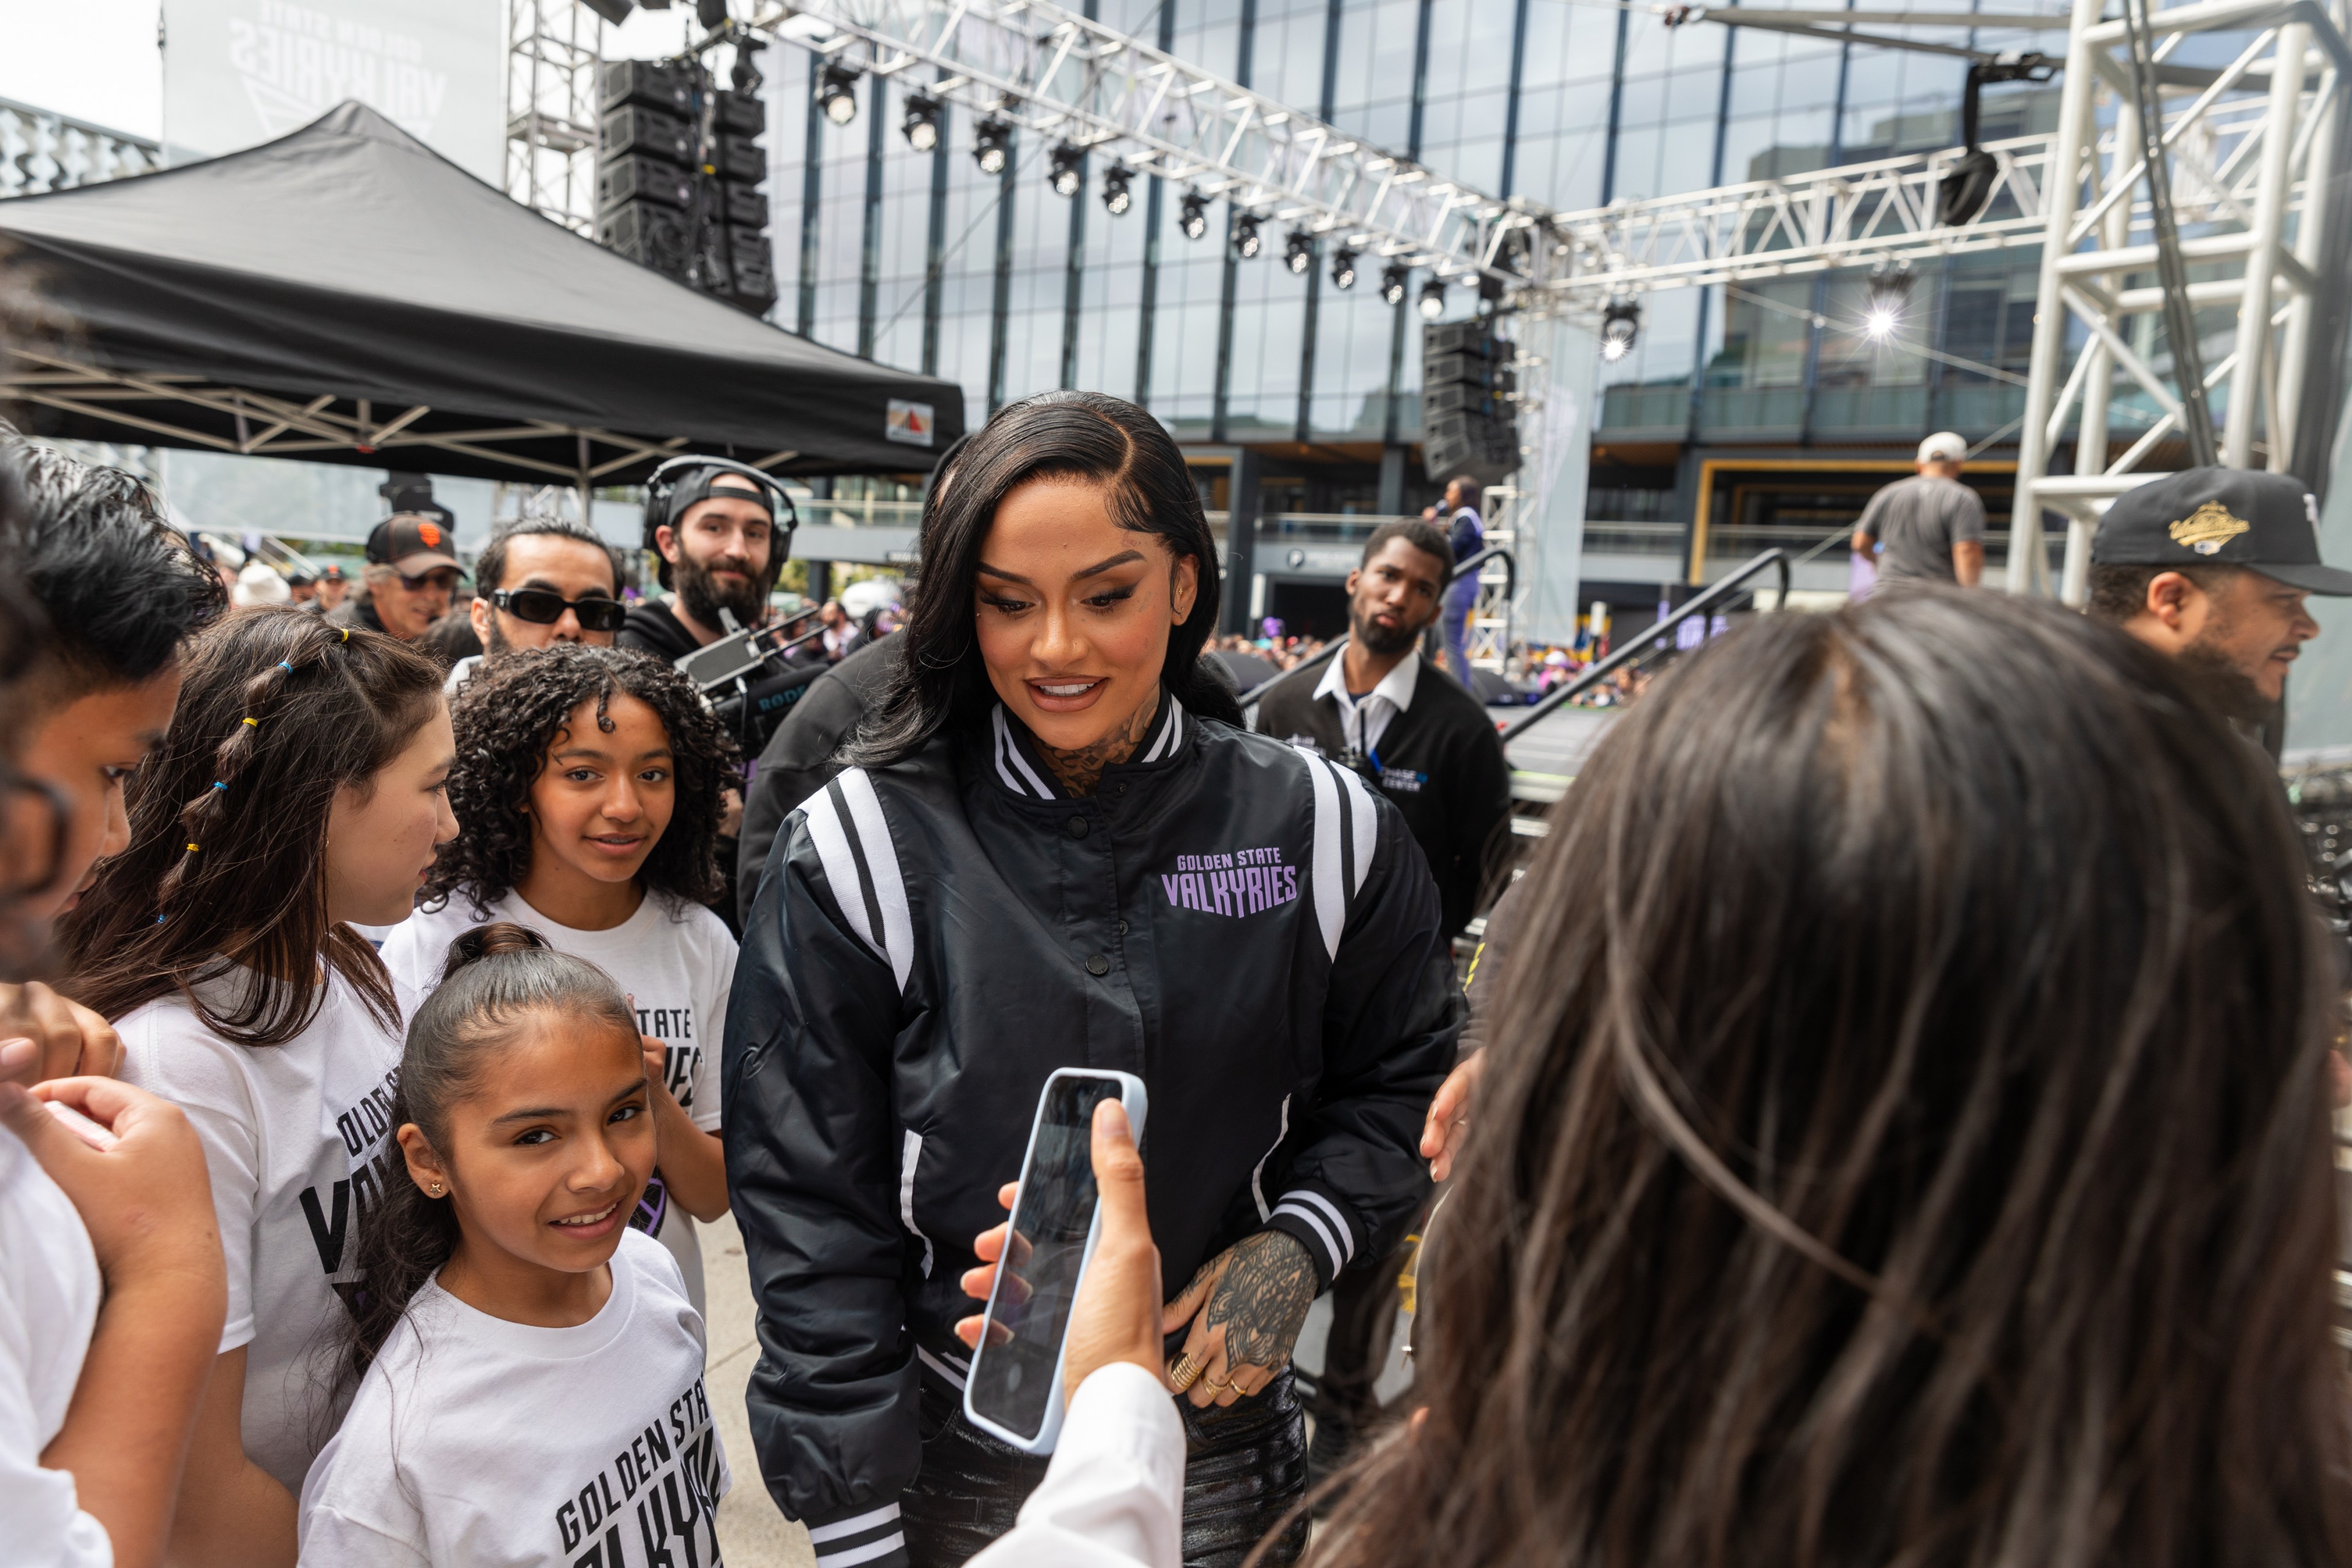 A woman in a sports jacket interacts with children in a crowded event, smiling as she looks at a phone held by a young girl.